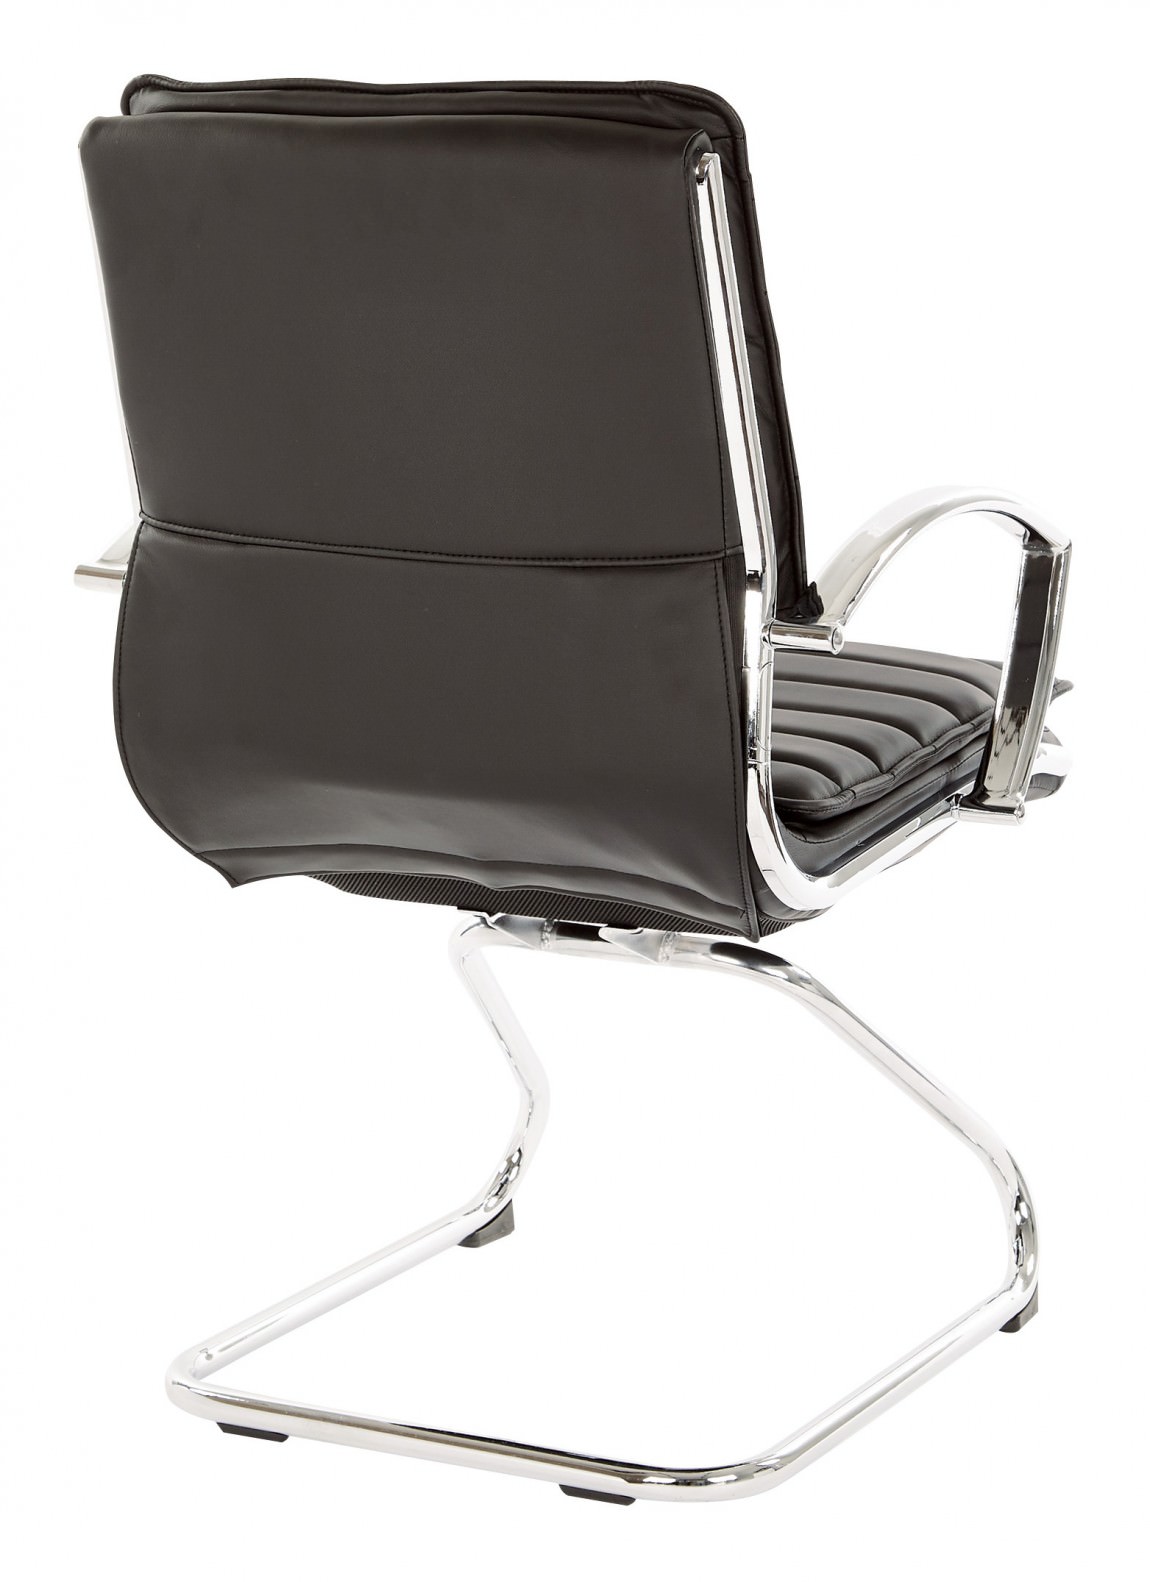 Cantilever Guest Chair